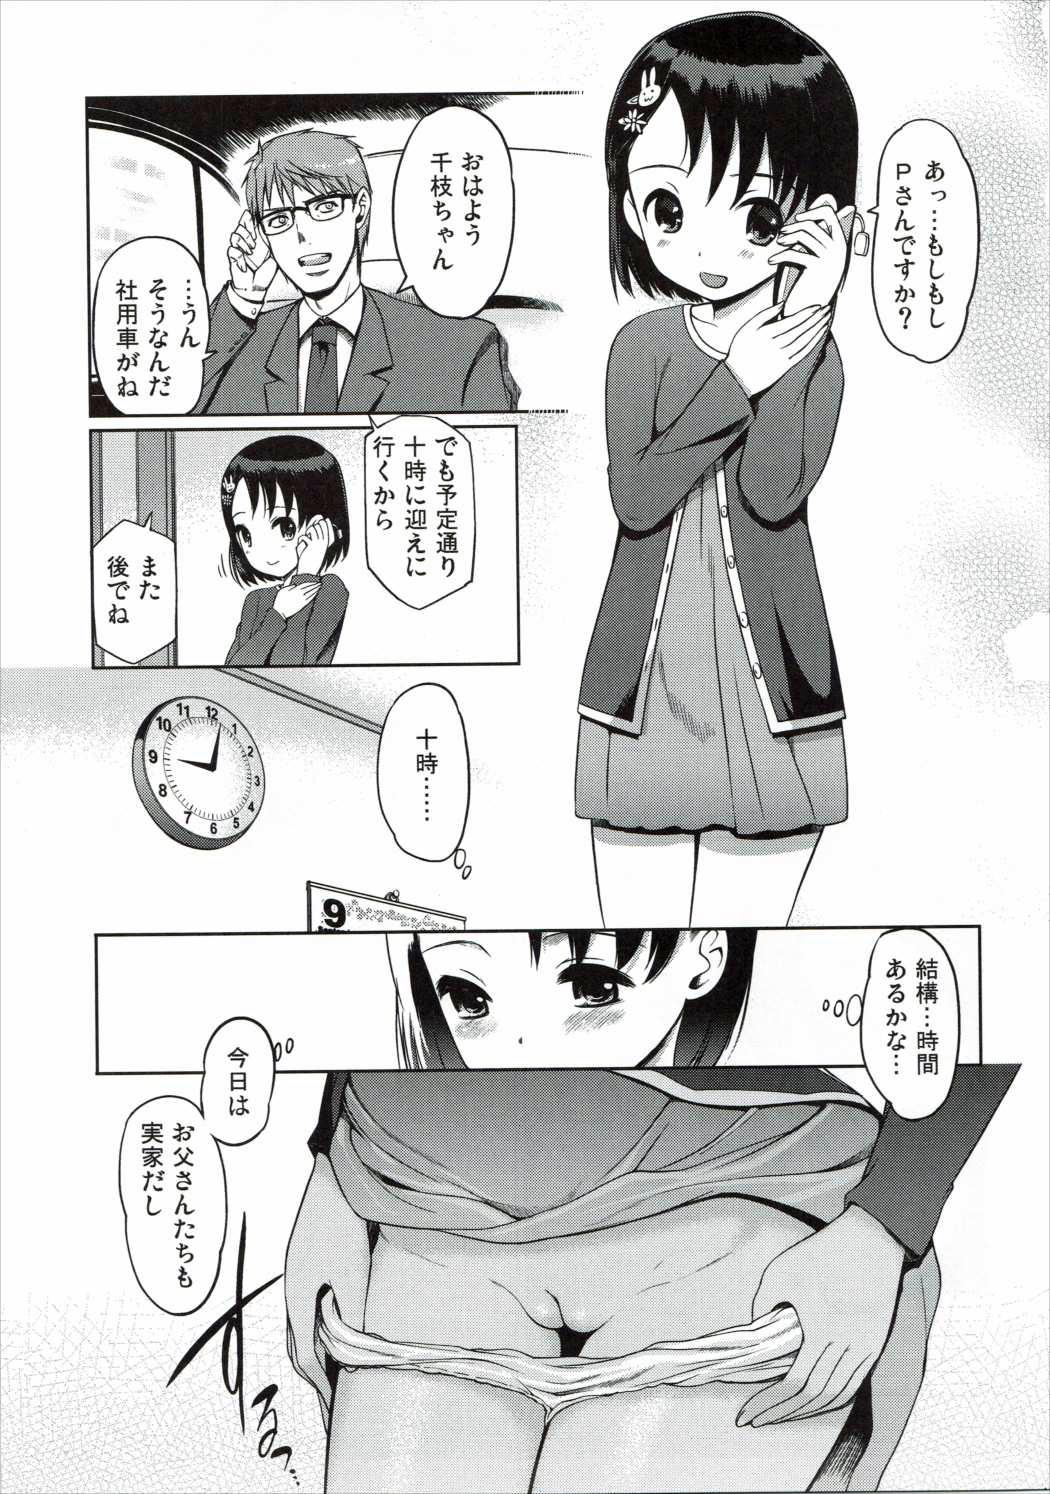 Staxxx P-san to Issho - The idolmaster Playing - Page 4